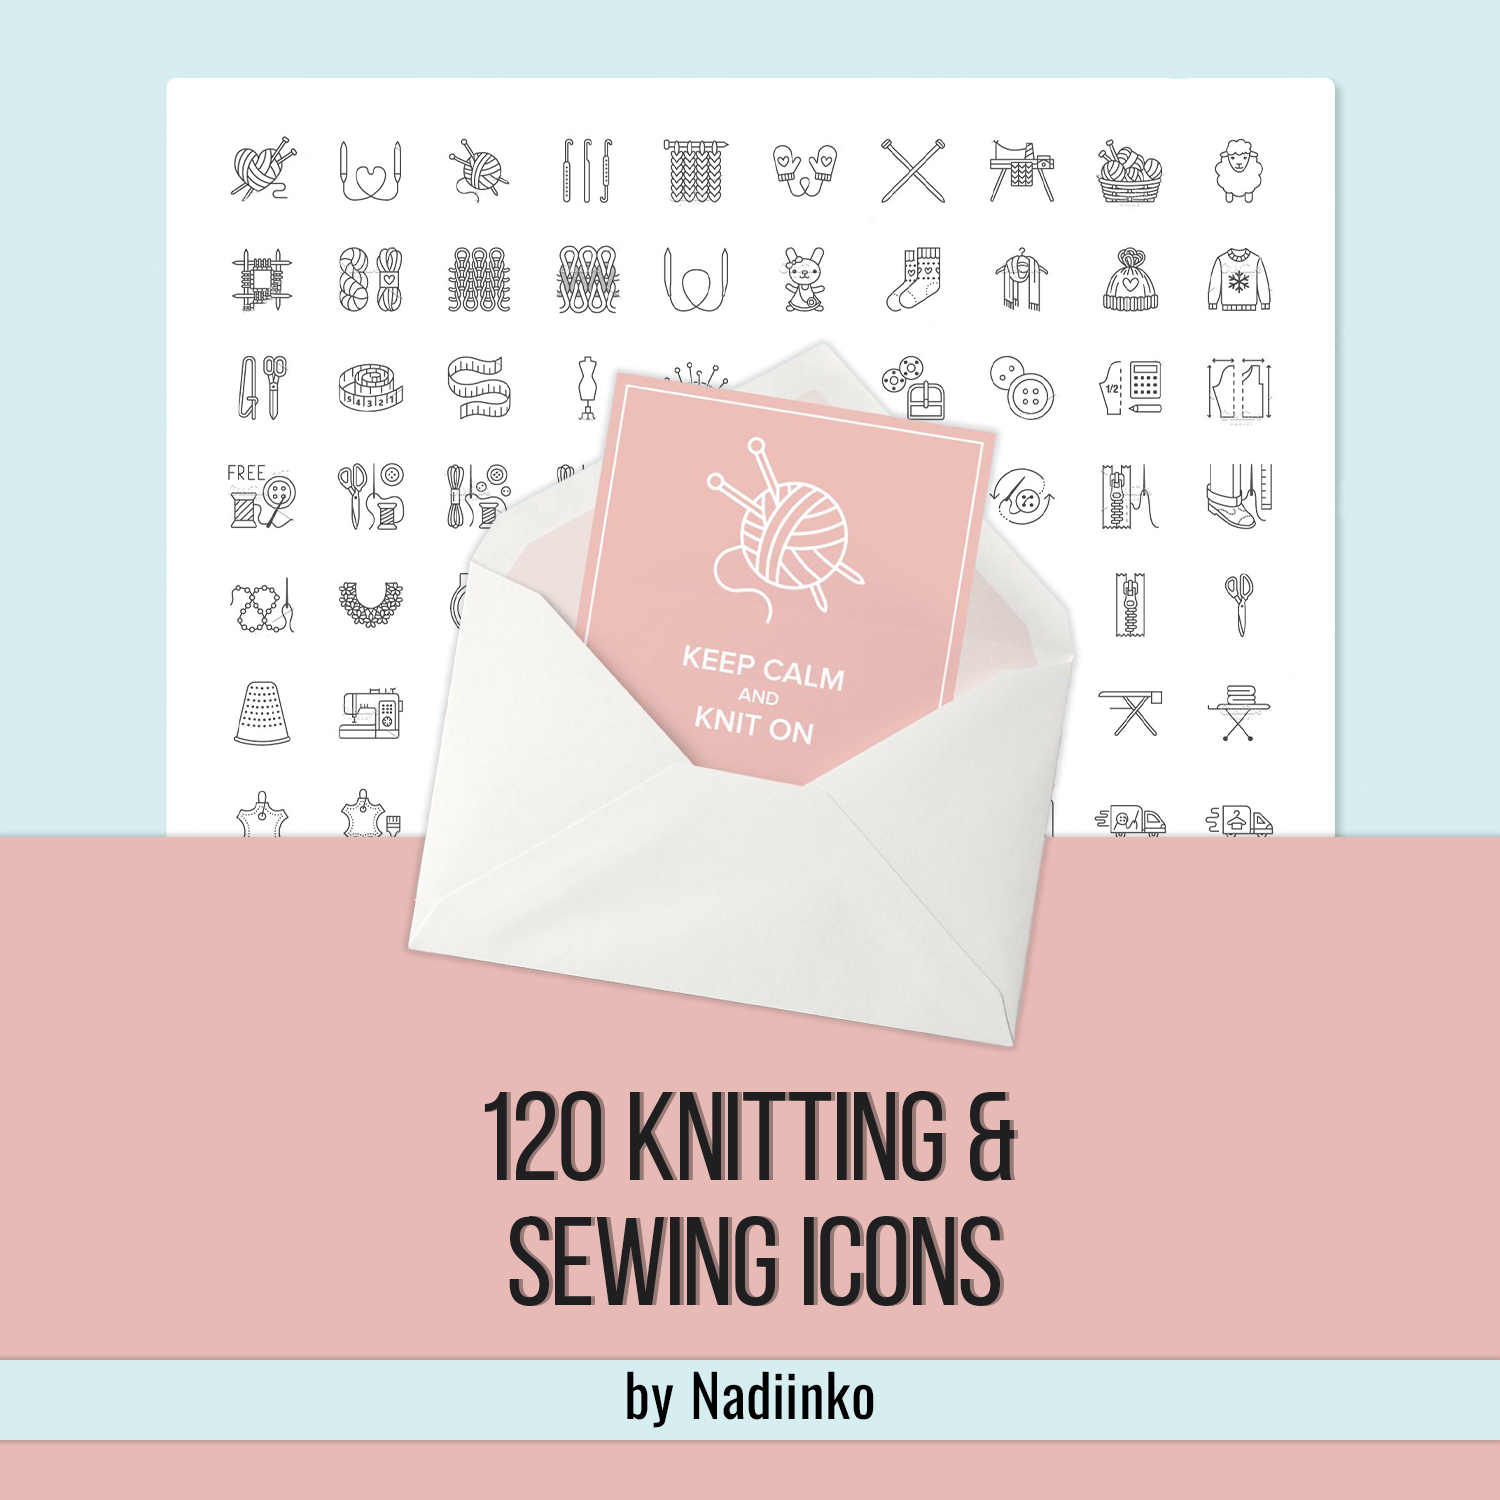 Knitting sewing icons preview.